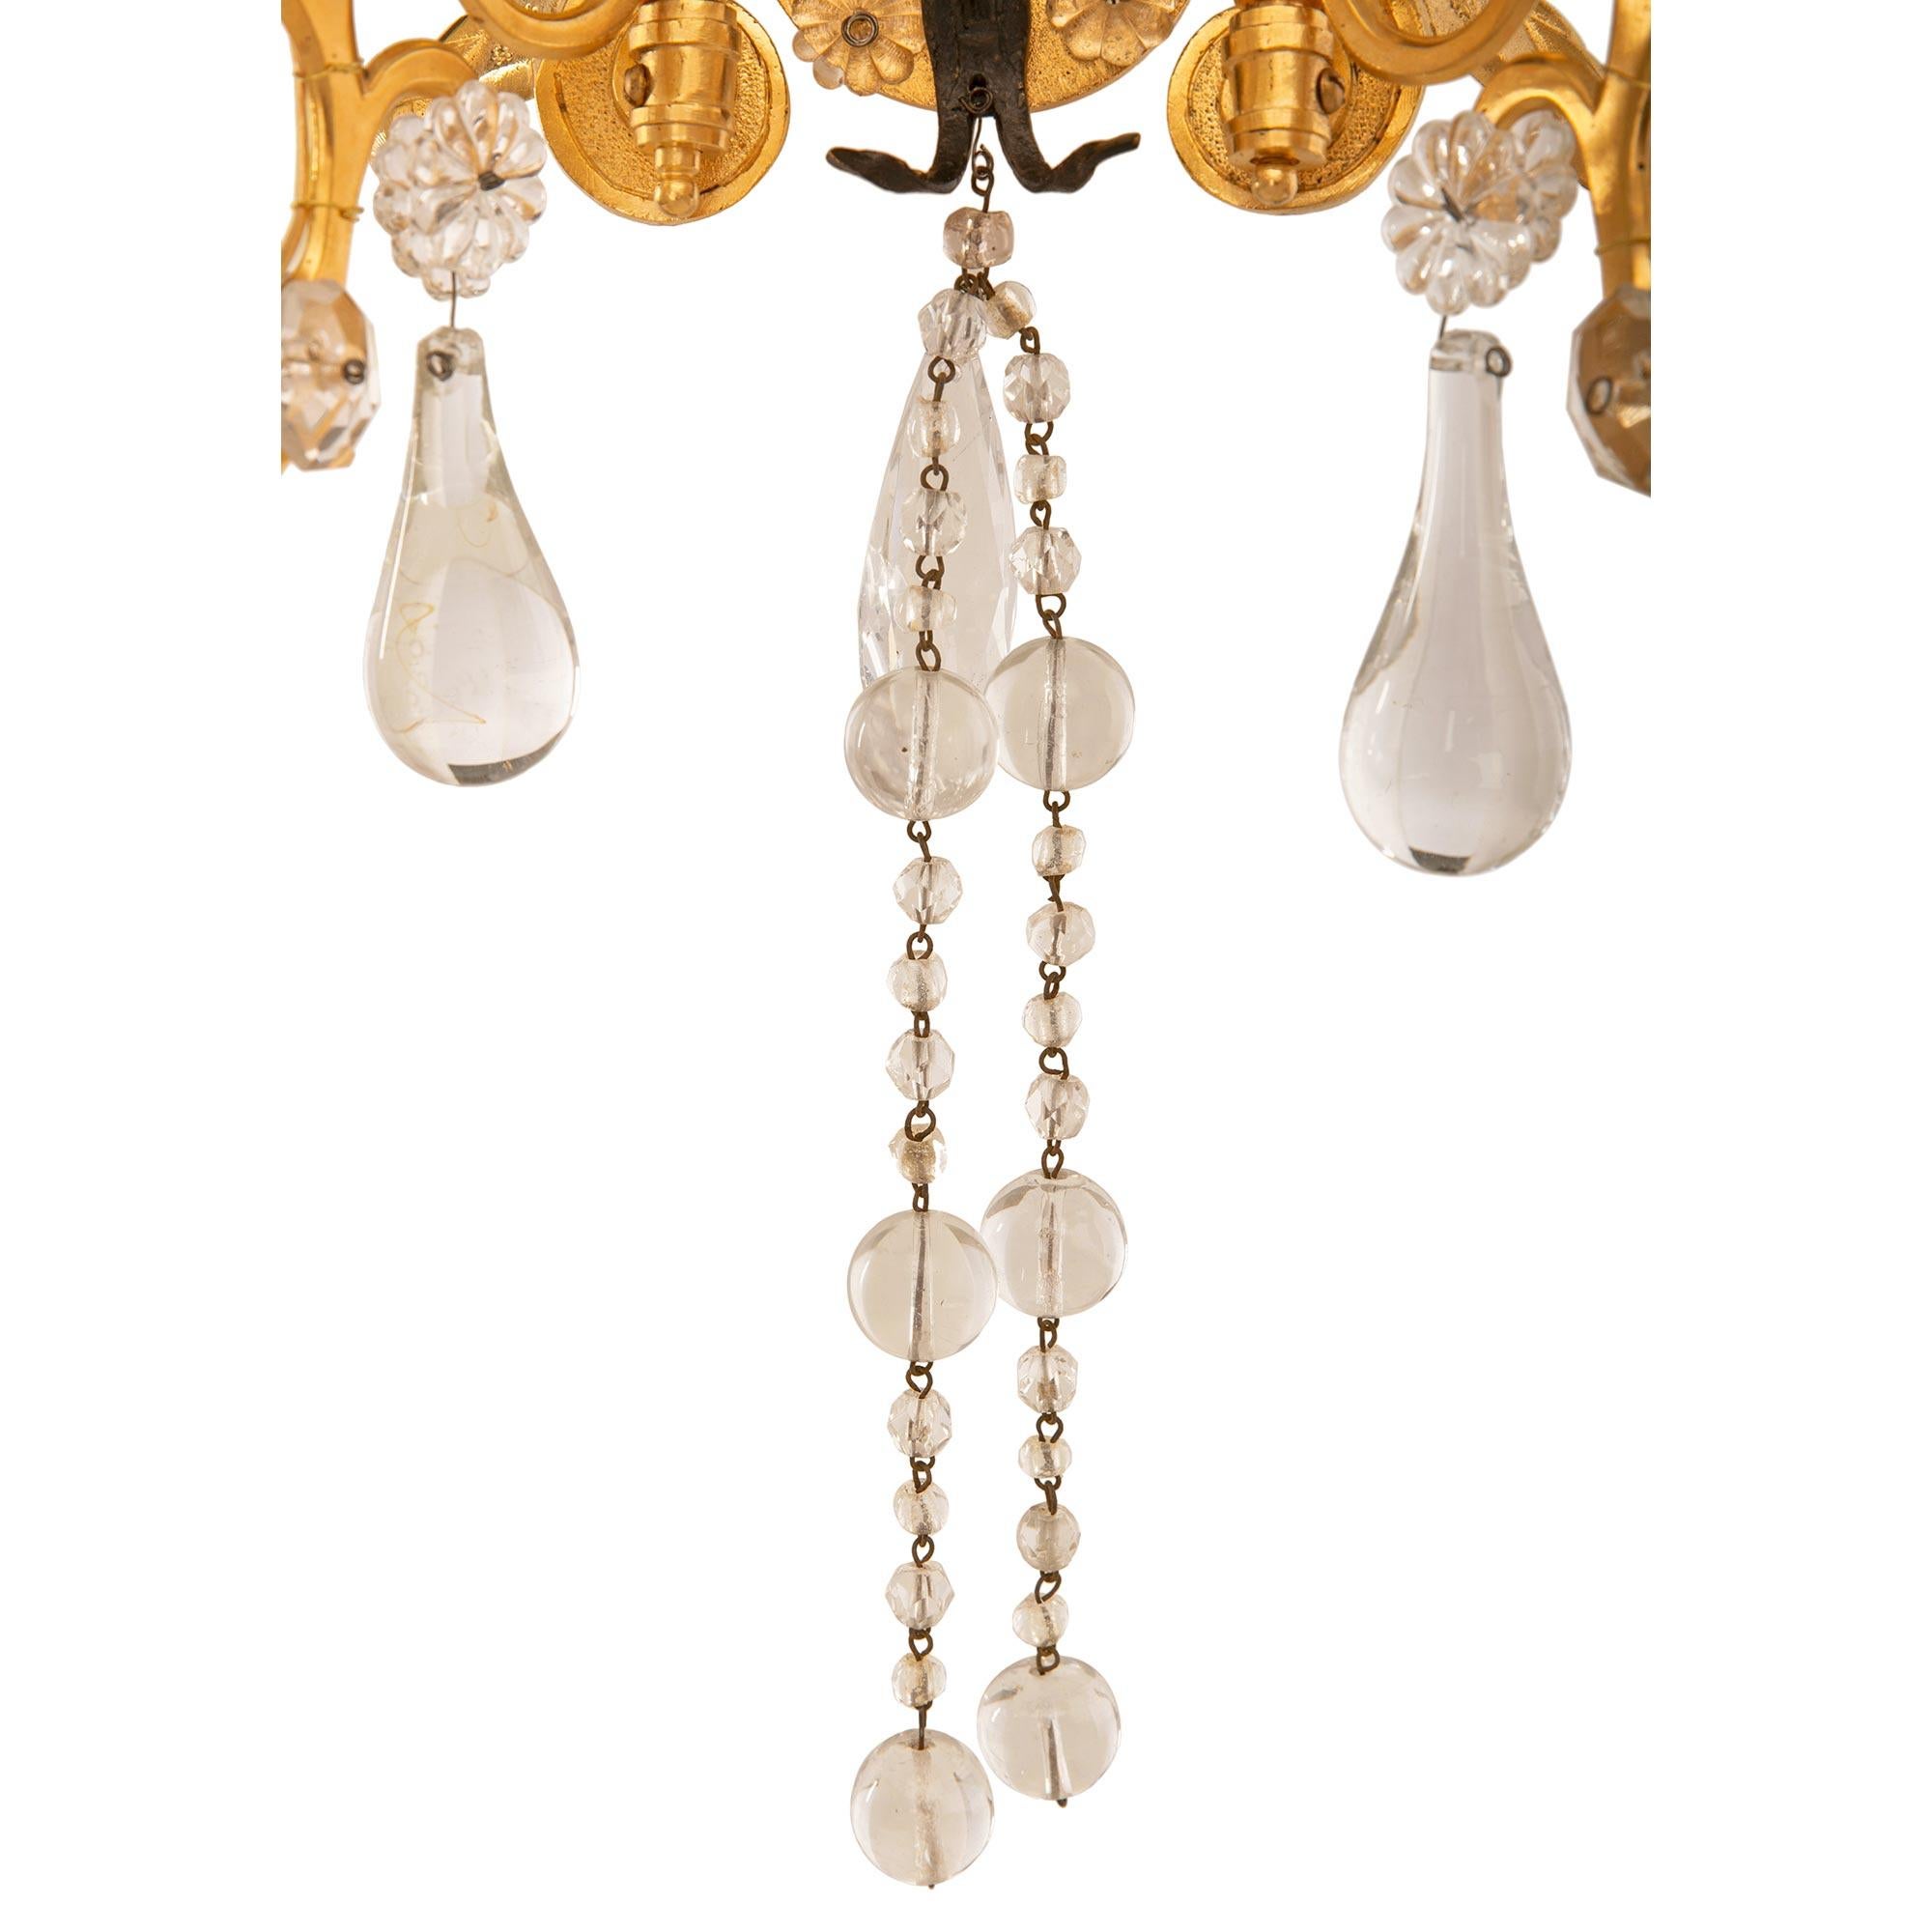 Pair of Italian Turn of the Century Louis XVI St. Ormolu and Crystal Sconces For Sale 1